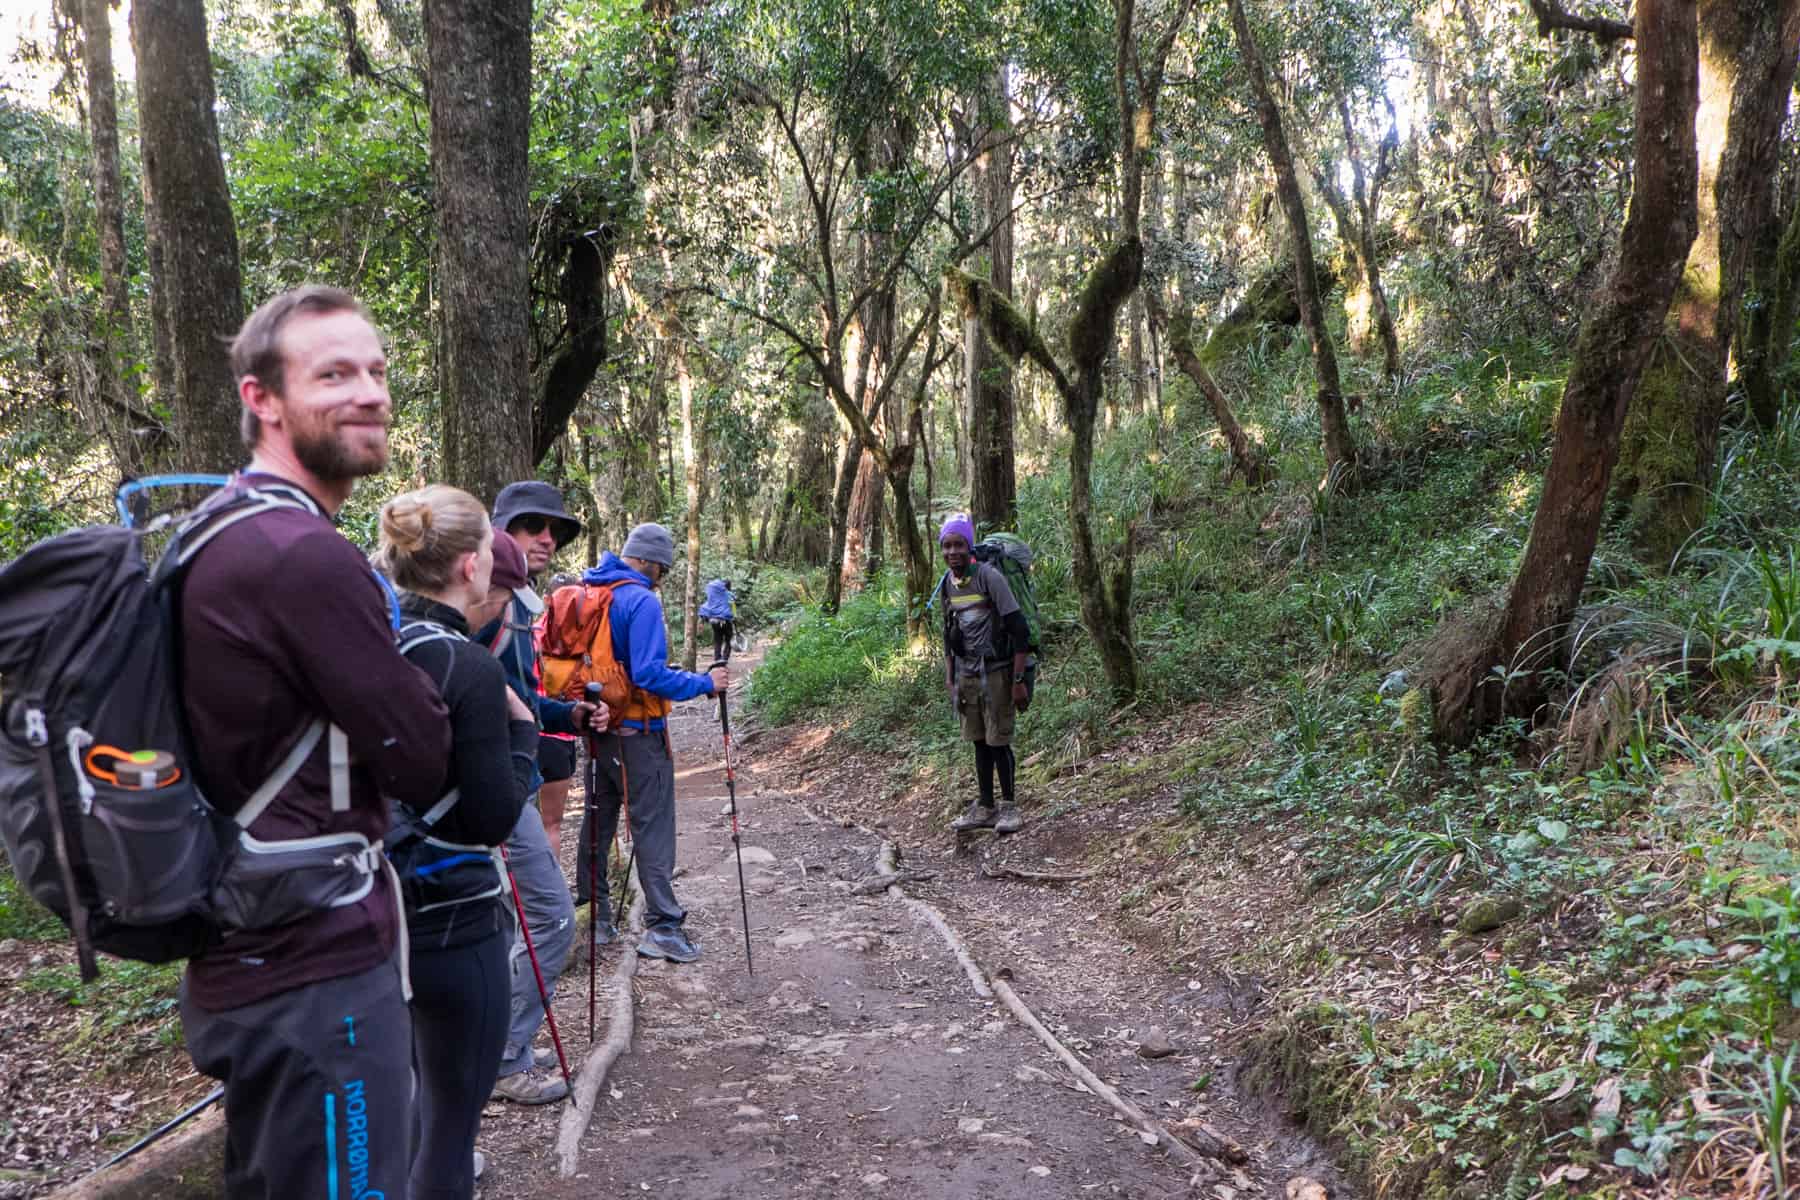 Five trekkers stand the left of a muddy trail path, and a guide, wearing a purple hat and carrying a large bag stands to the right, in the Rainforest zone of Kilimanjaro.